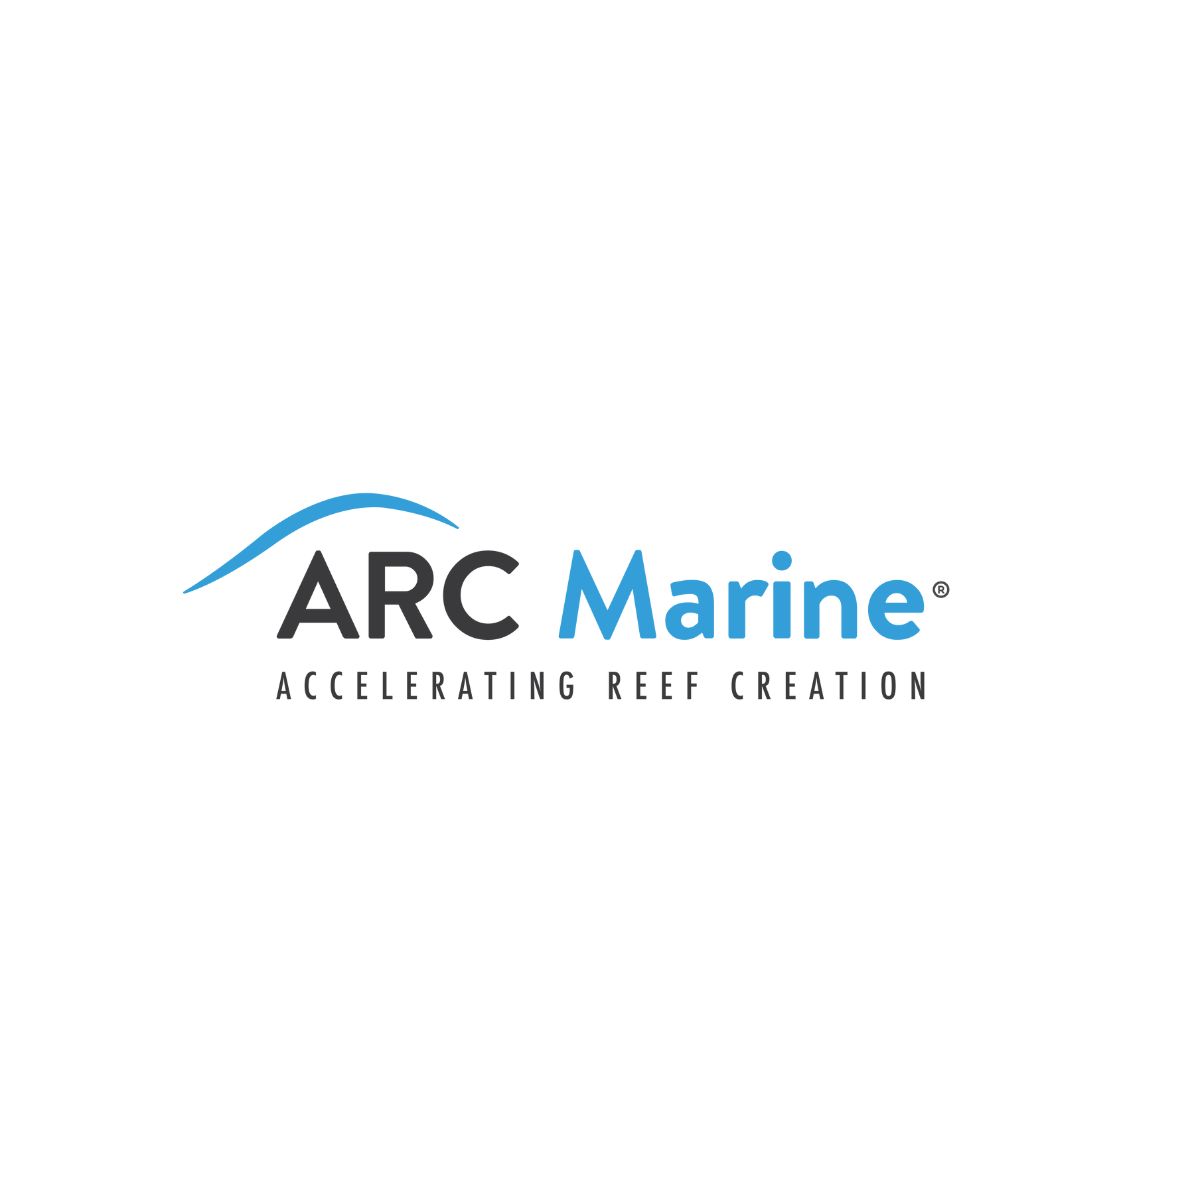 [𝗦𝗜𝗟𝗩𝗘𝗥 𝗦𝗣𝗢𝗡𝗦𝗢𝗥] Big thank you to @arc_marine for sponsoring the #CWW2023 conference. 🙂

It's an award-winning eco-engineering company that brings nature-inclusive solutions to the offshore energy, coastal defence and aquaculture industries.
arcmarine.co.uk